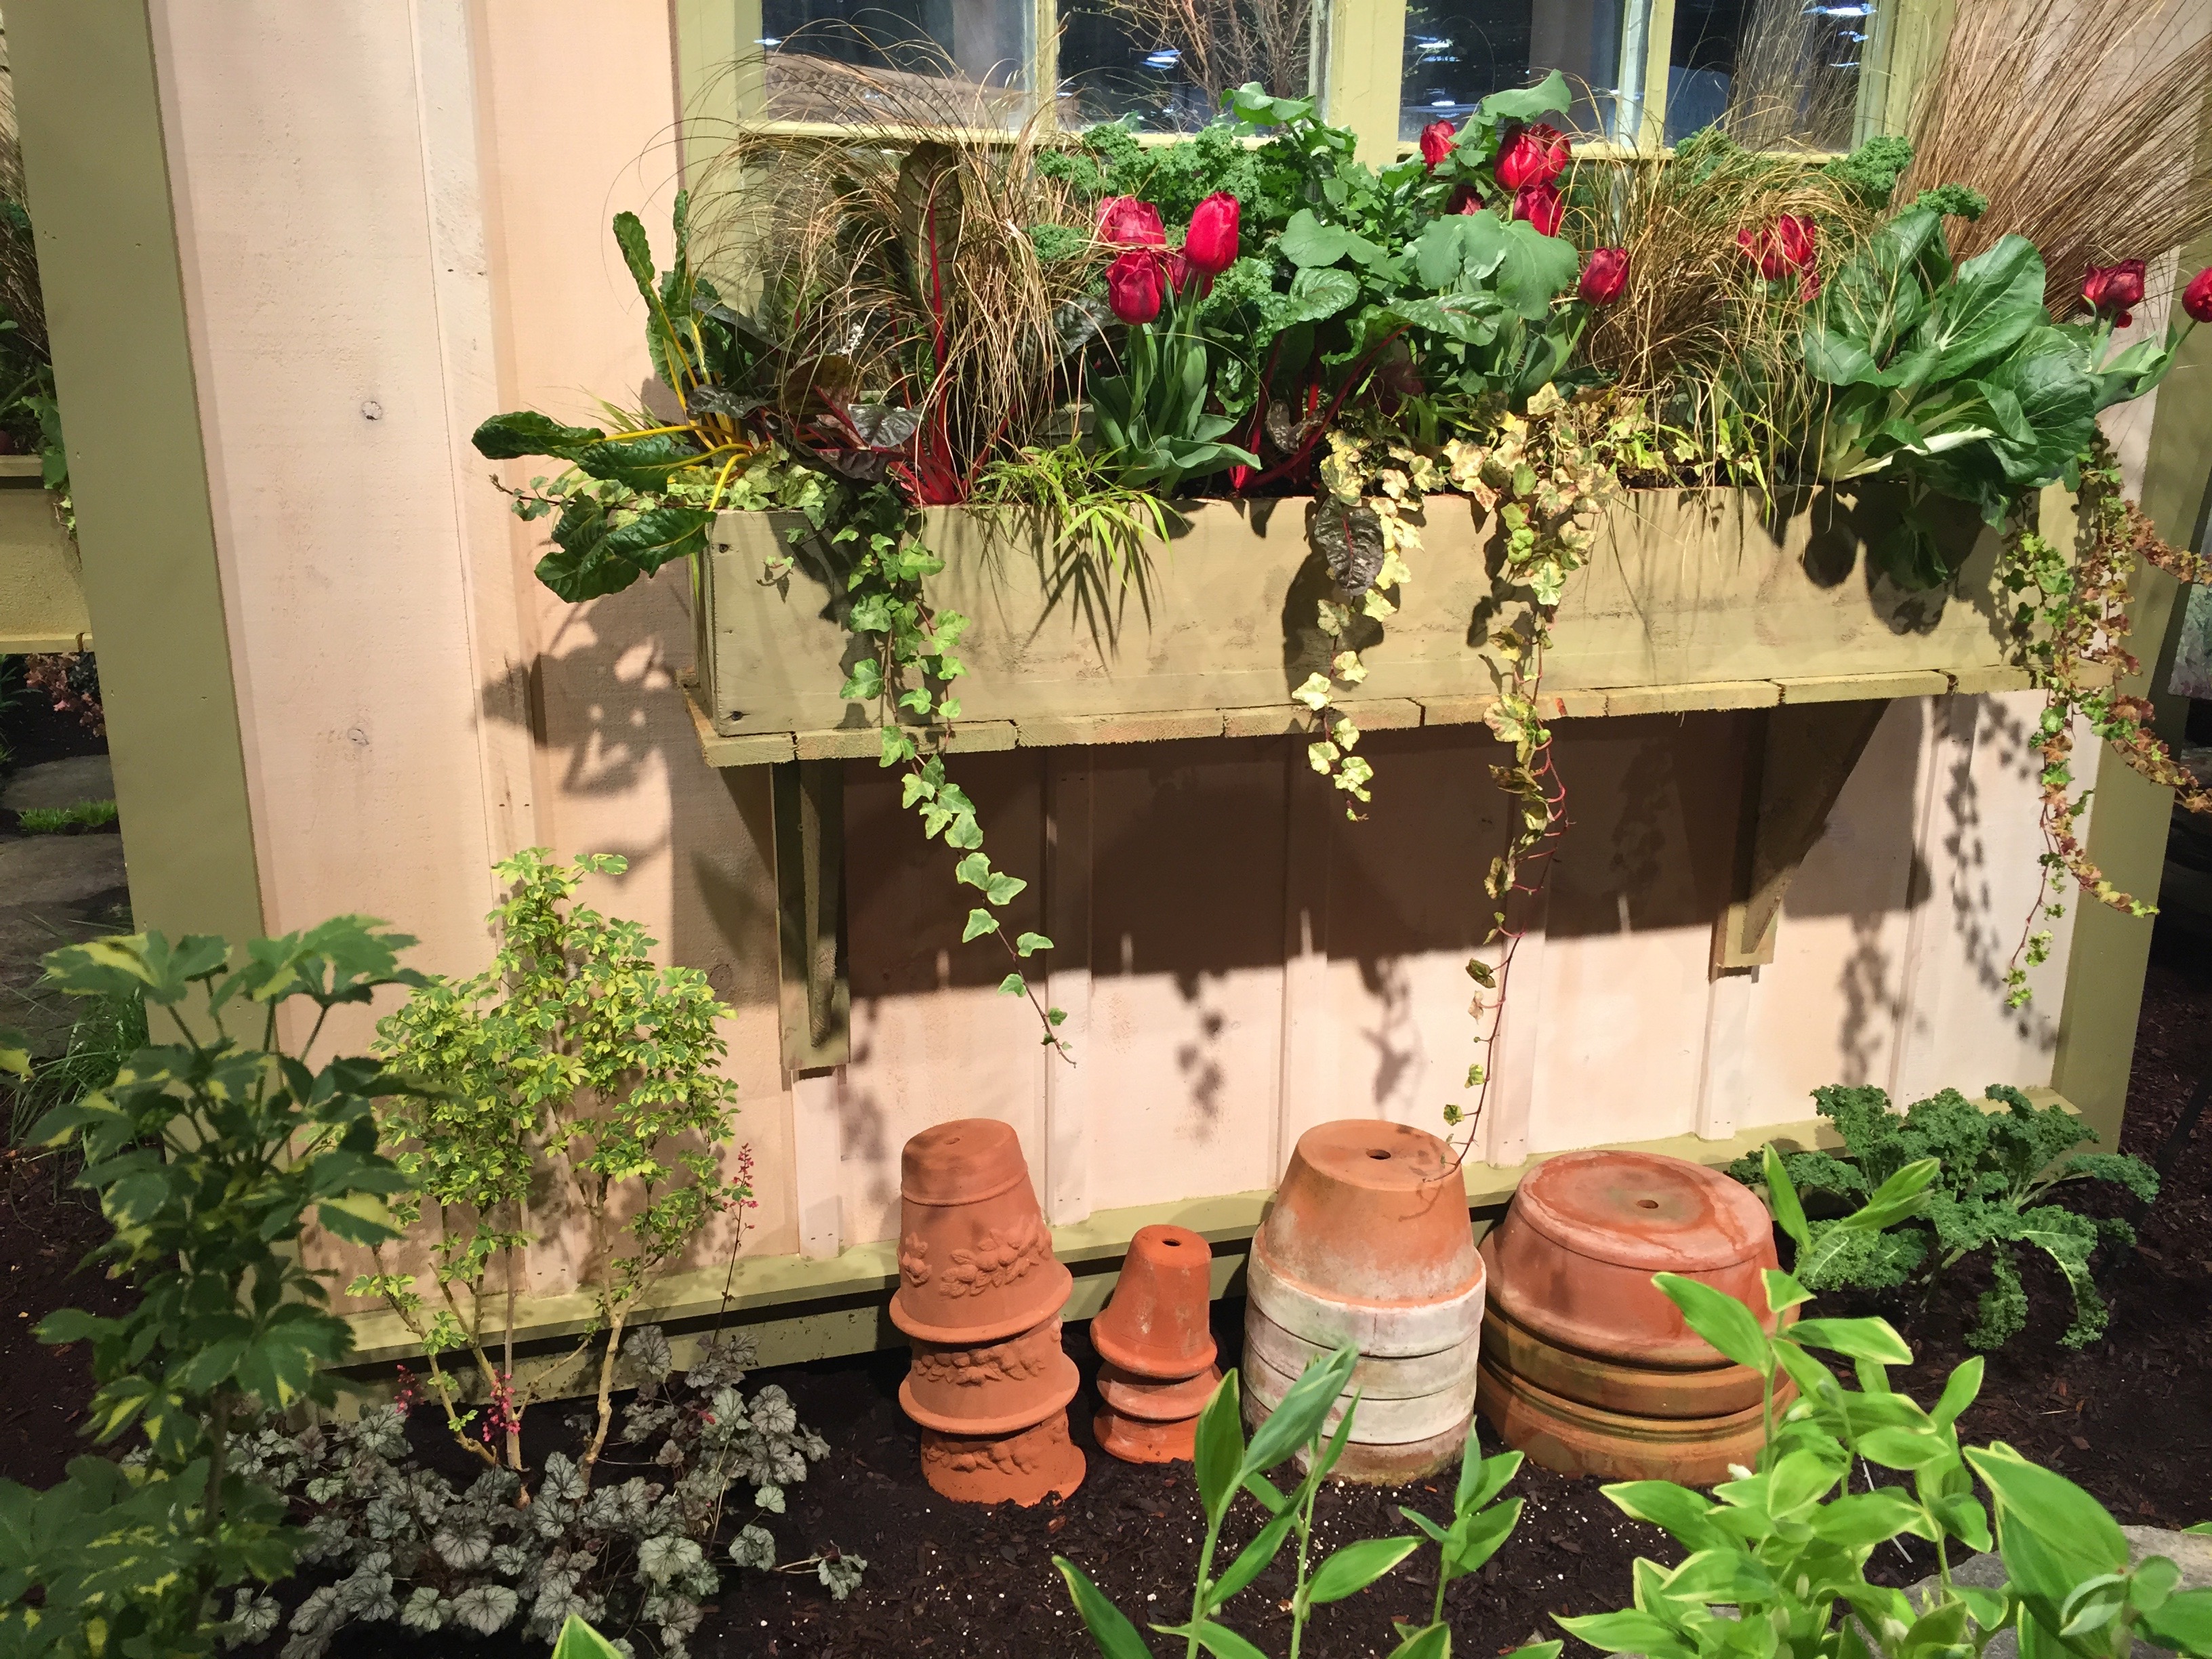 Potting Shed Exhibit at the Boston Flower Show, It's the weekend! Number 46